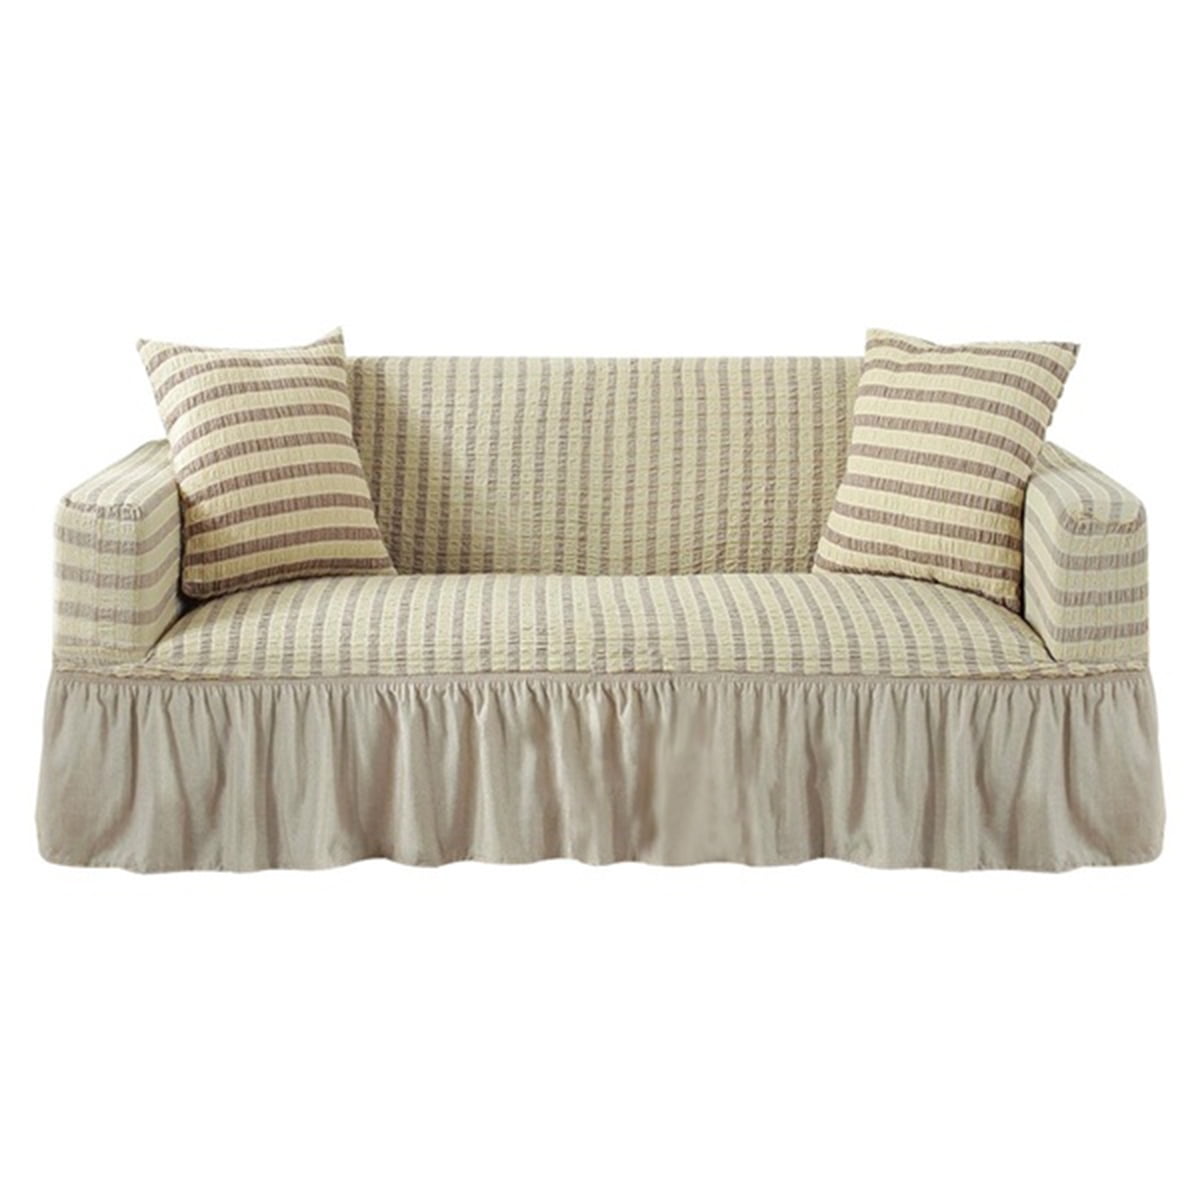 14 Seats Sofa Slipcover Stretch Soft Spandex Slippery 1Piece Sofa Cover with Pleated Ruffled